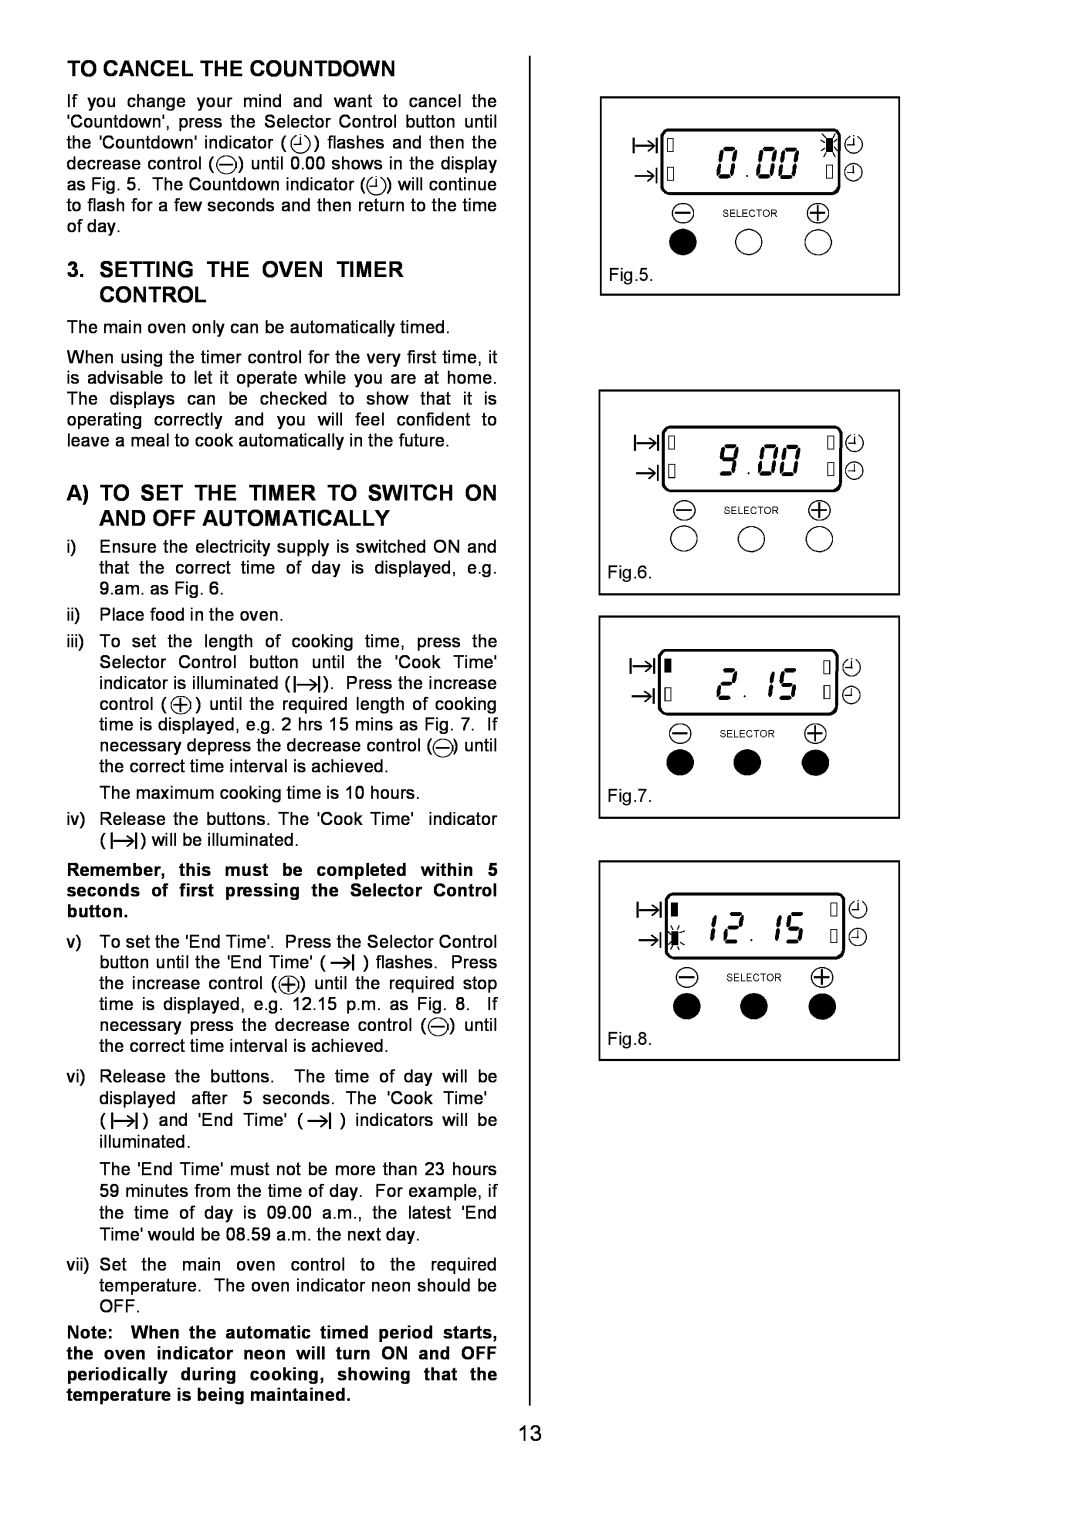 Tricity Bendix SE454 installation instructions To Cancel The Countdown, Setting The Oven Timer Control 